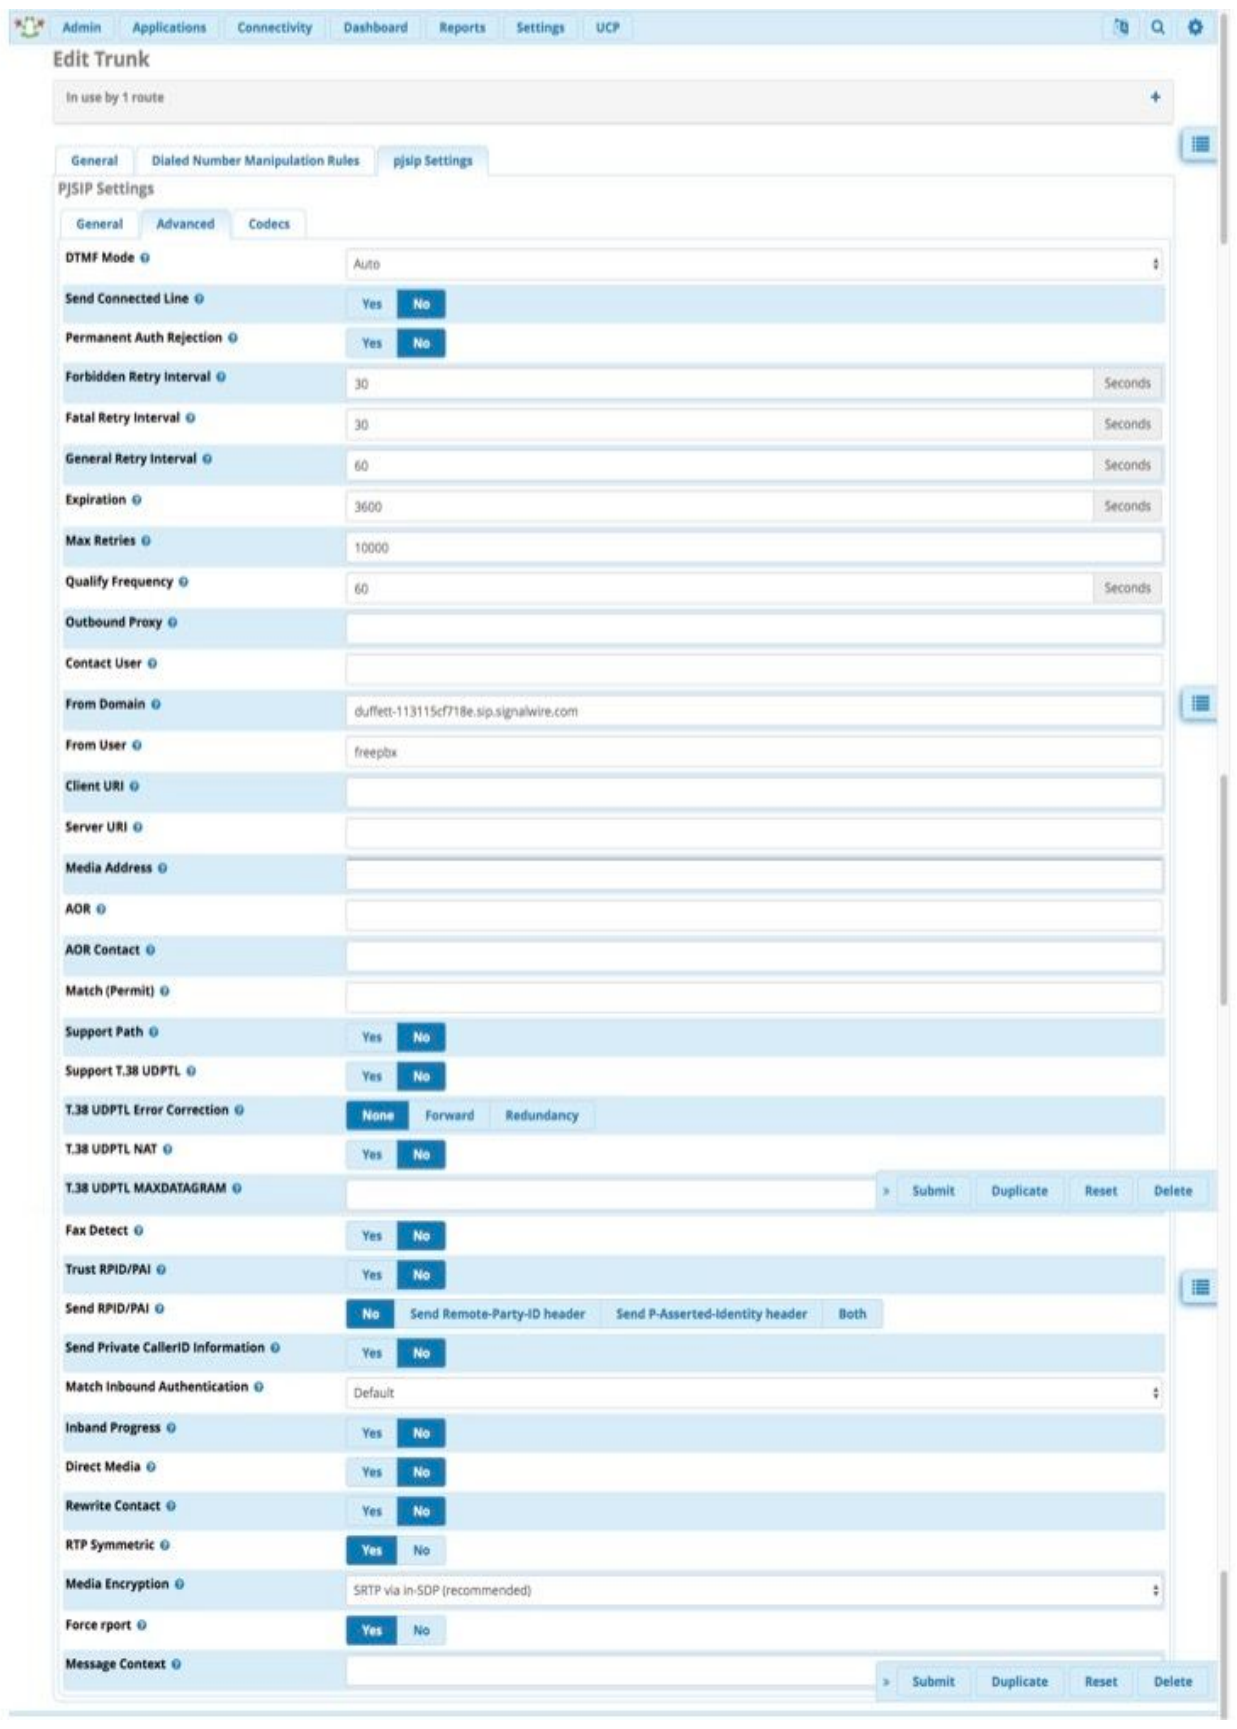 A screenshot of the Advanced tab of the Edit Trunk page in Asterisk. From Domain is set to the desired space URI. From User is set to freepbx, or the name selected for the SIP endpoint. Media Encryption is set to SRTP via in-SDP.